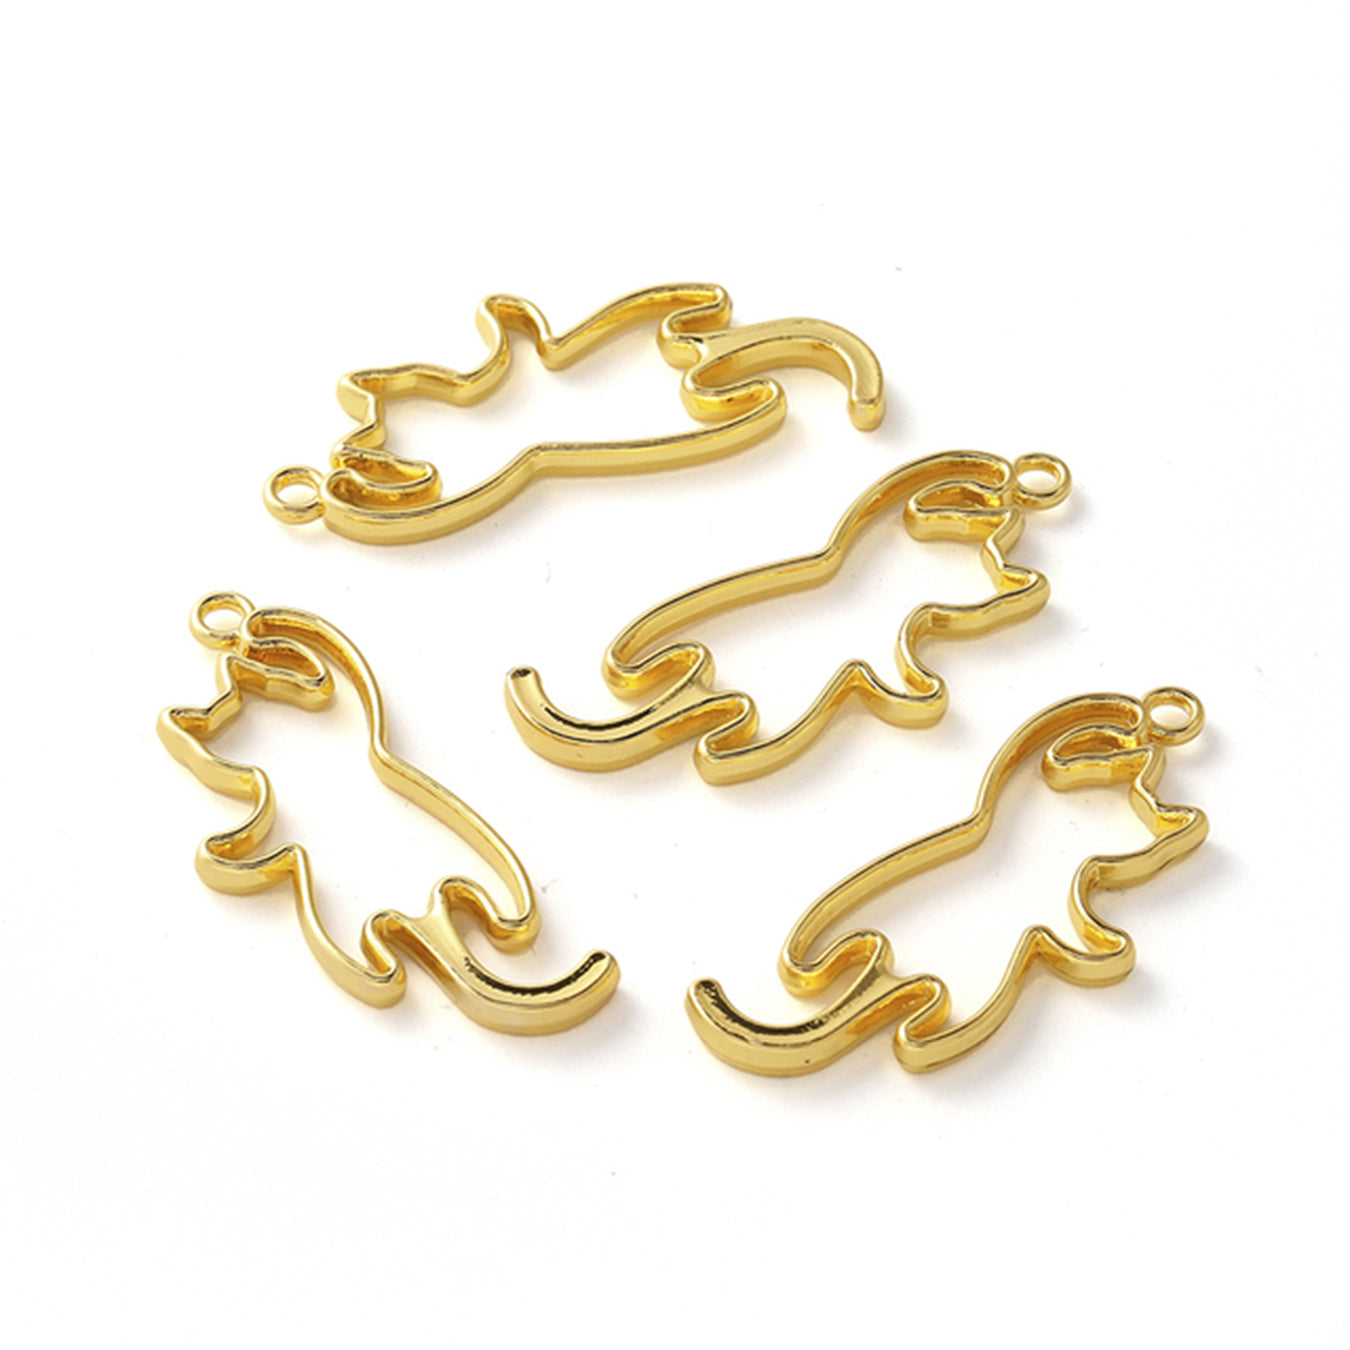 Golden metal shapes of cats